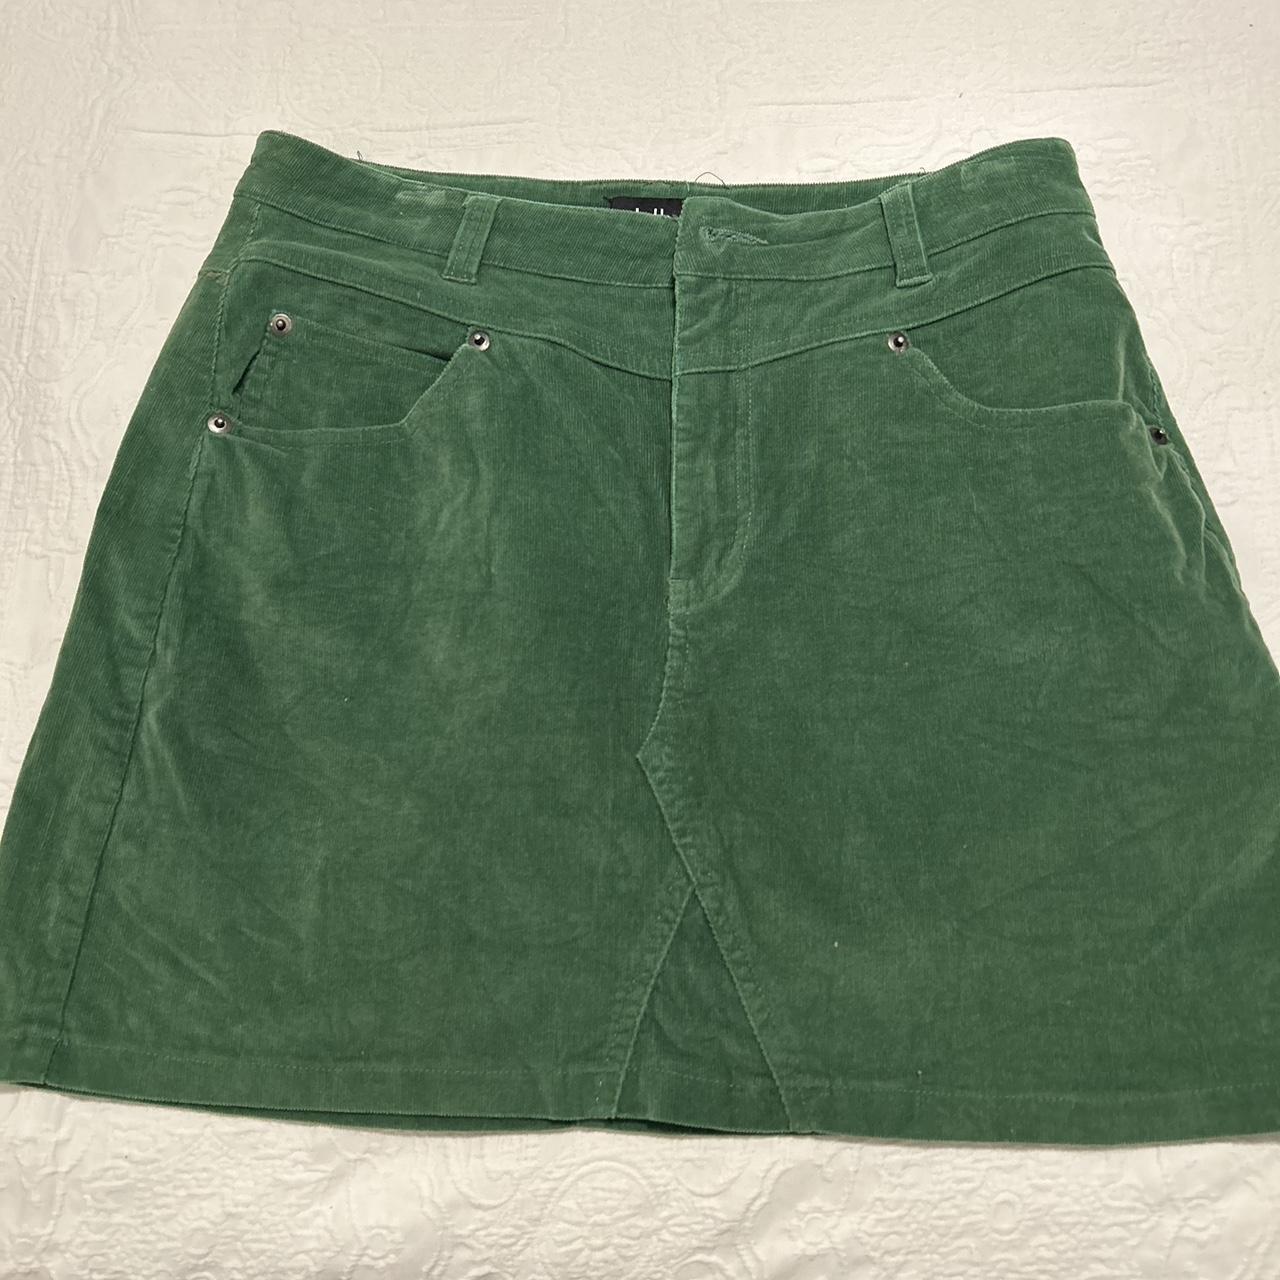 Green cords Skirt Worn but in good condition - Depop